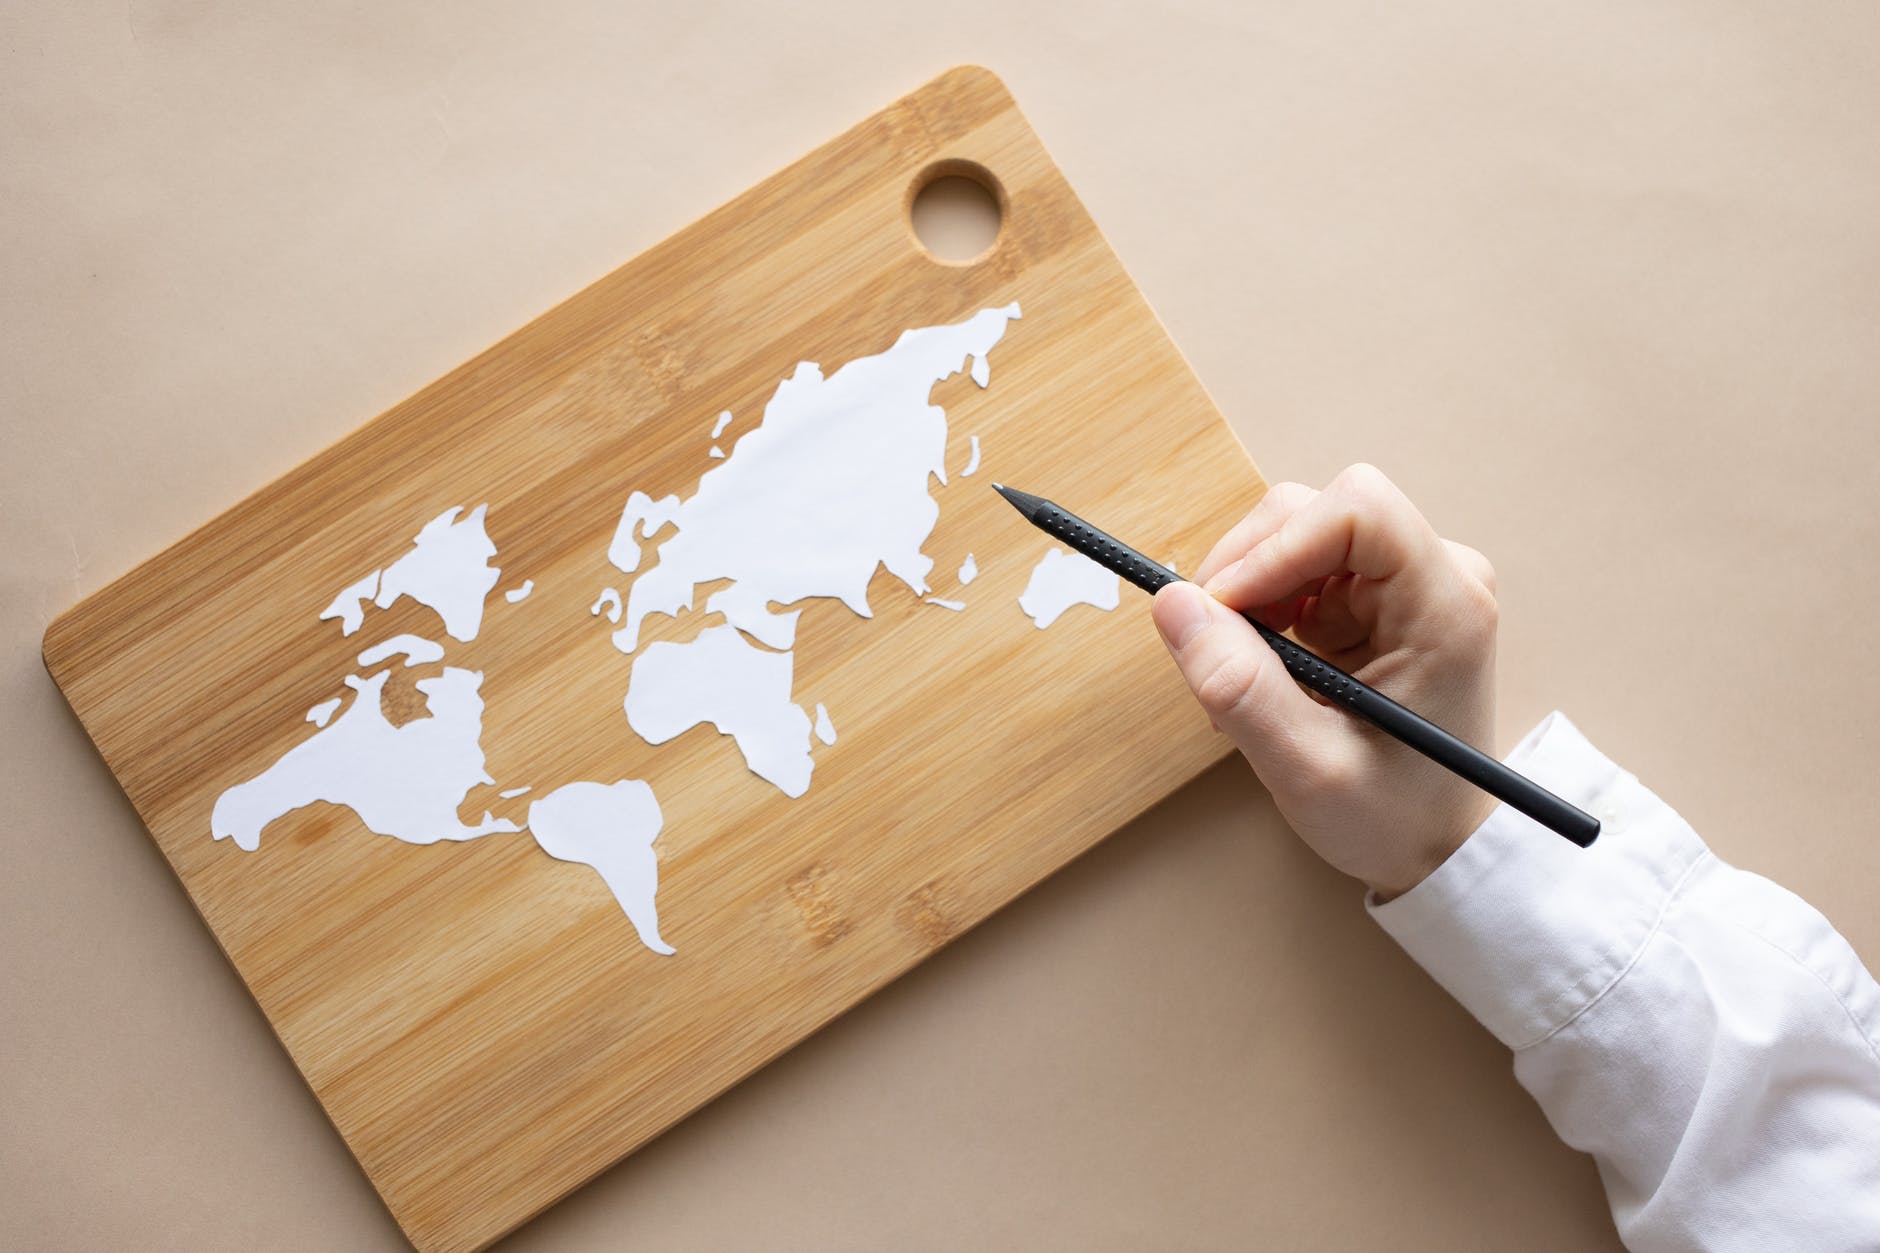 crop artist with white pencil drawing world map on desk